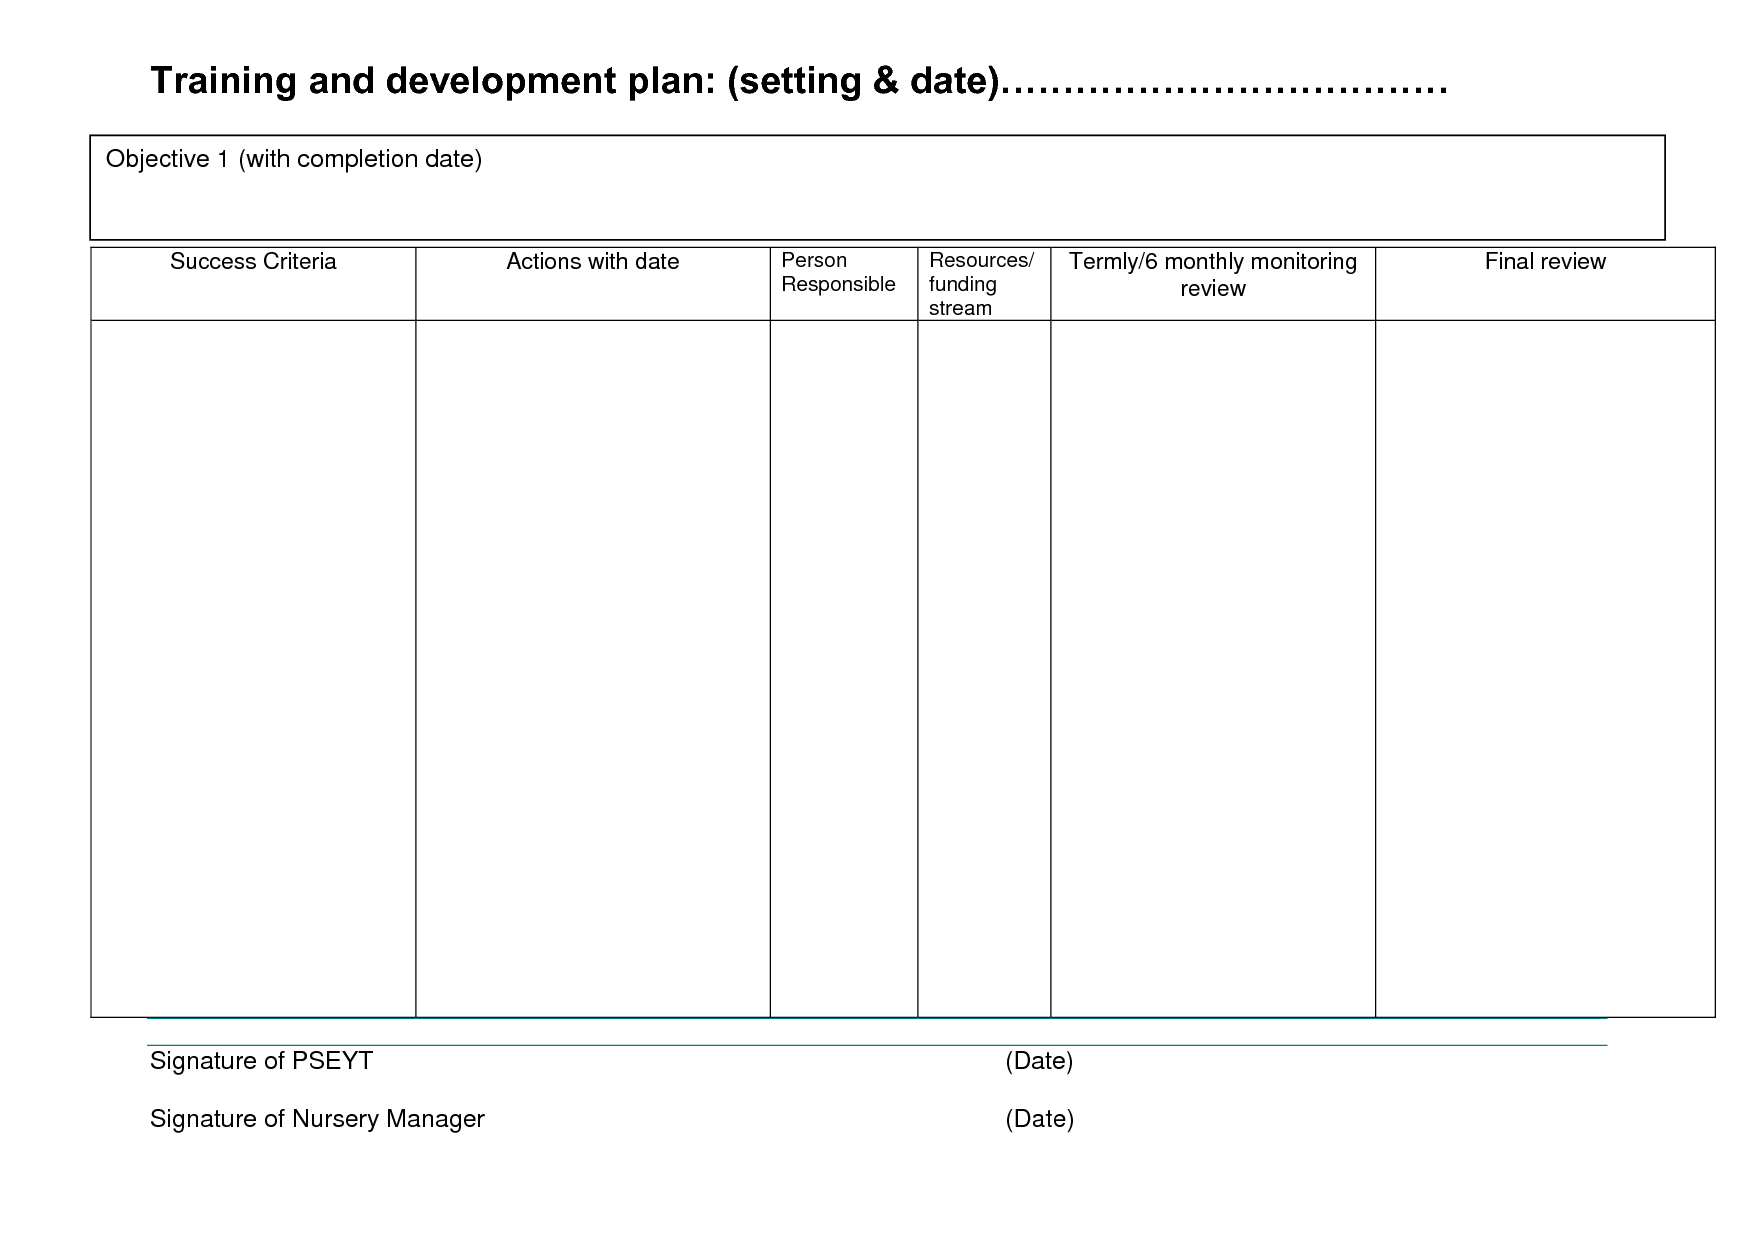 Goal Setting Action Plan Template Image